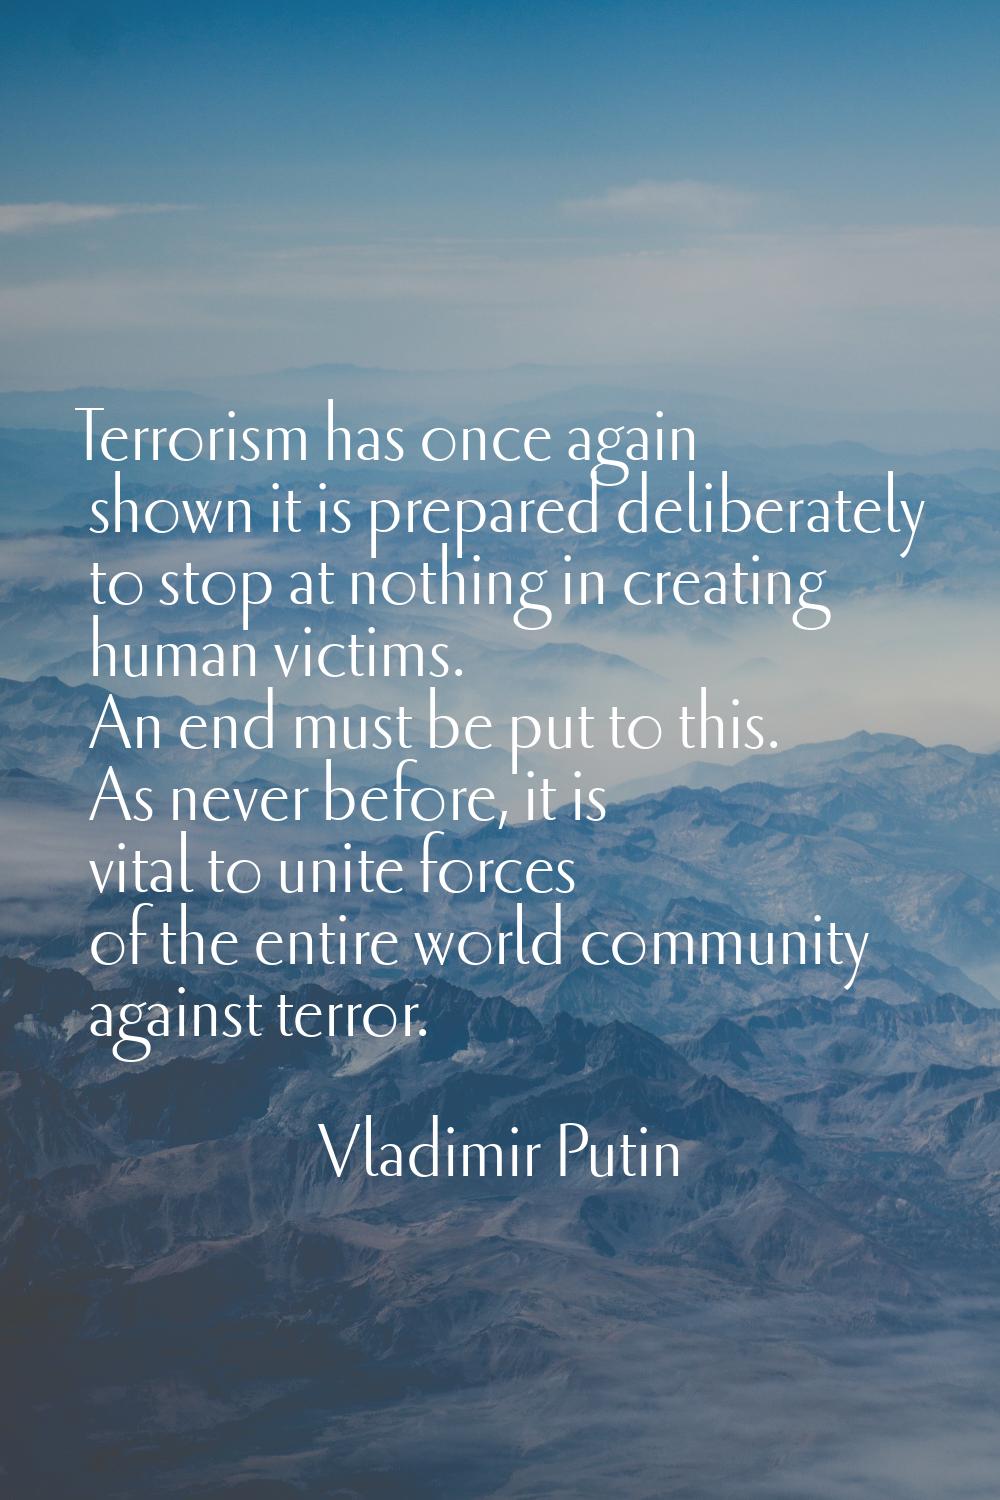 Terrorism has once again shown it is prepared deliberately to stop at nothing in creating human vic